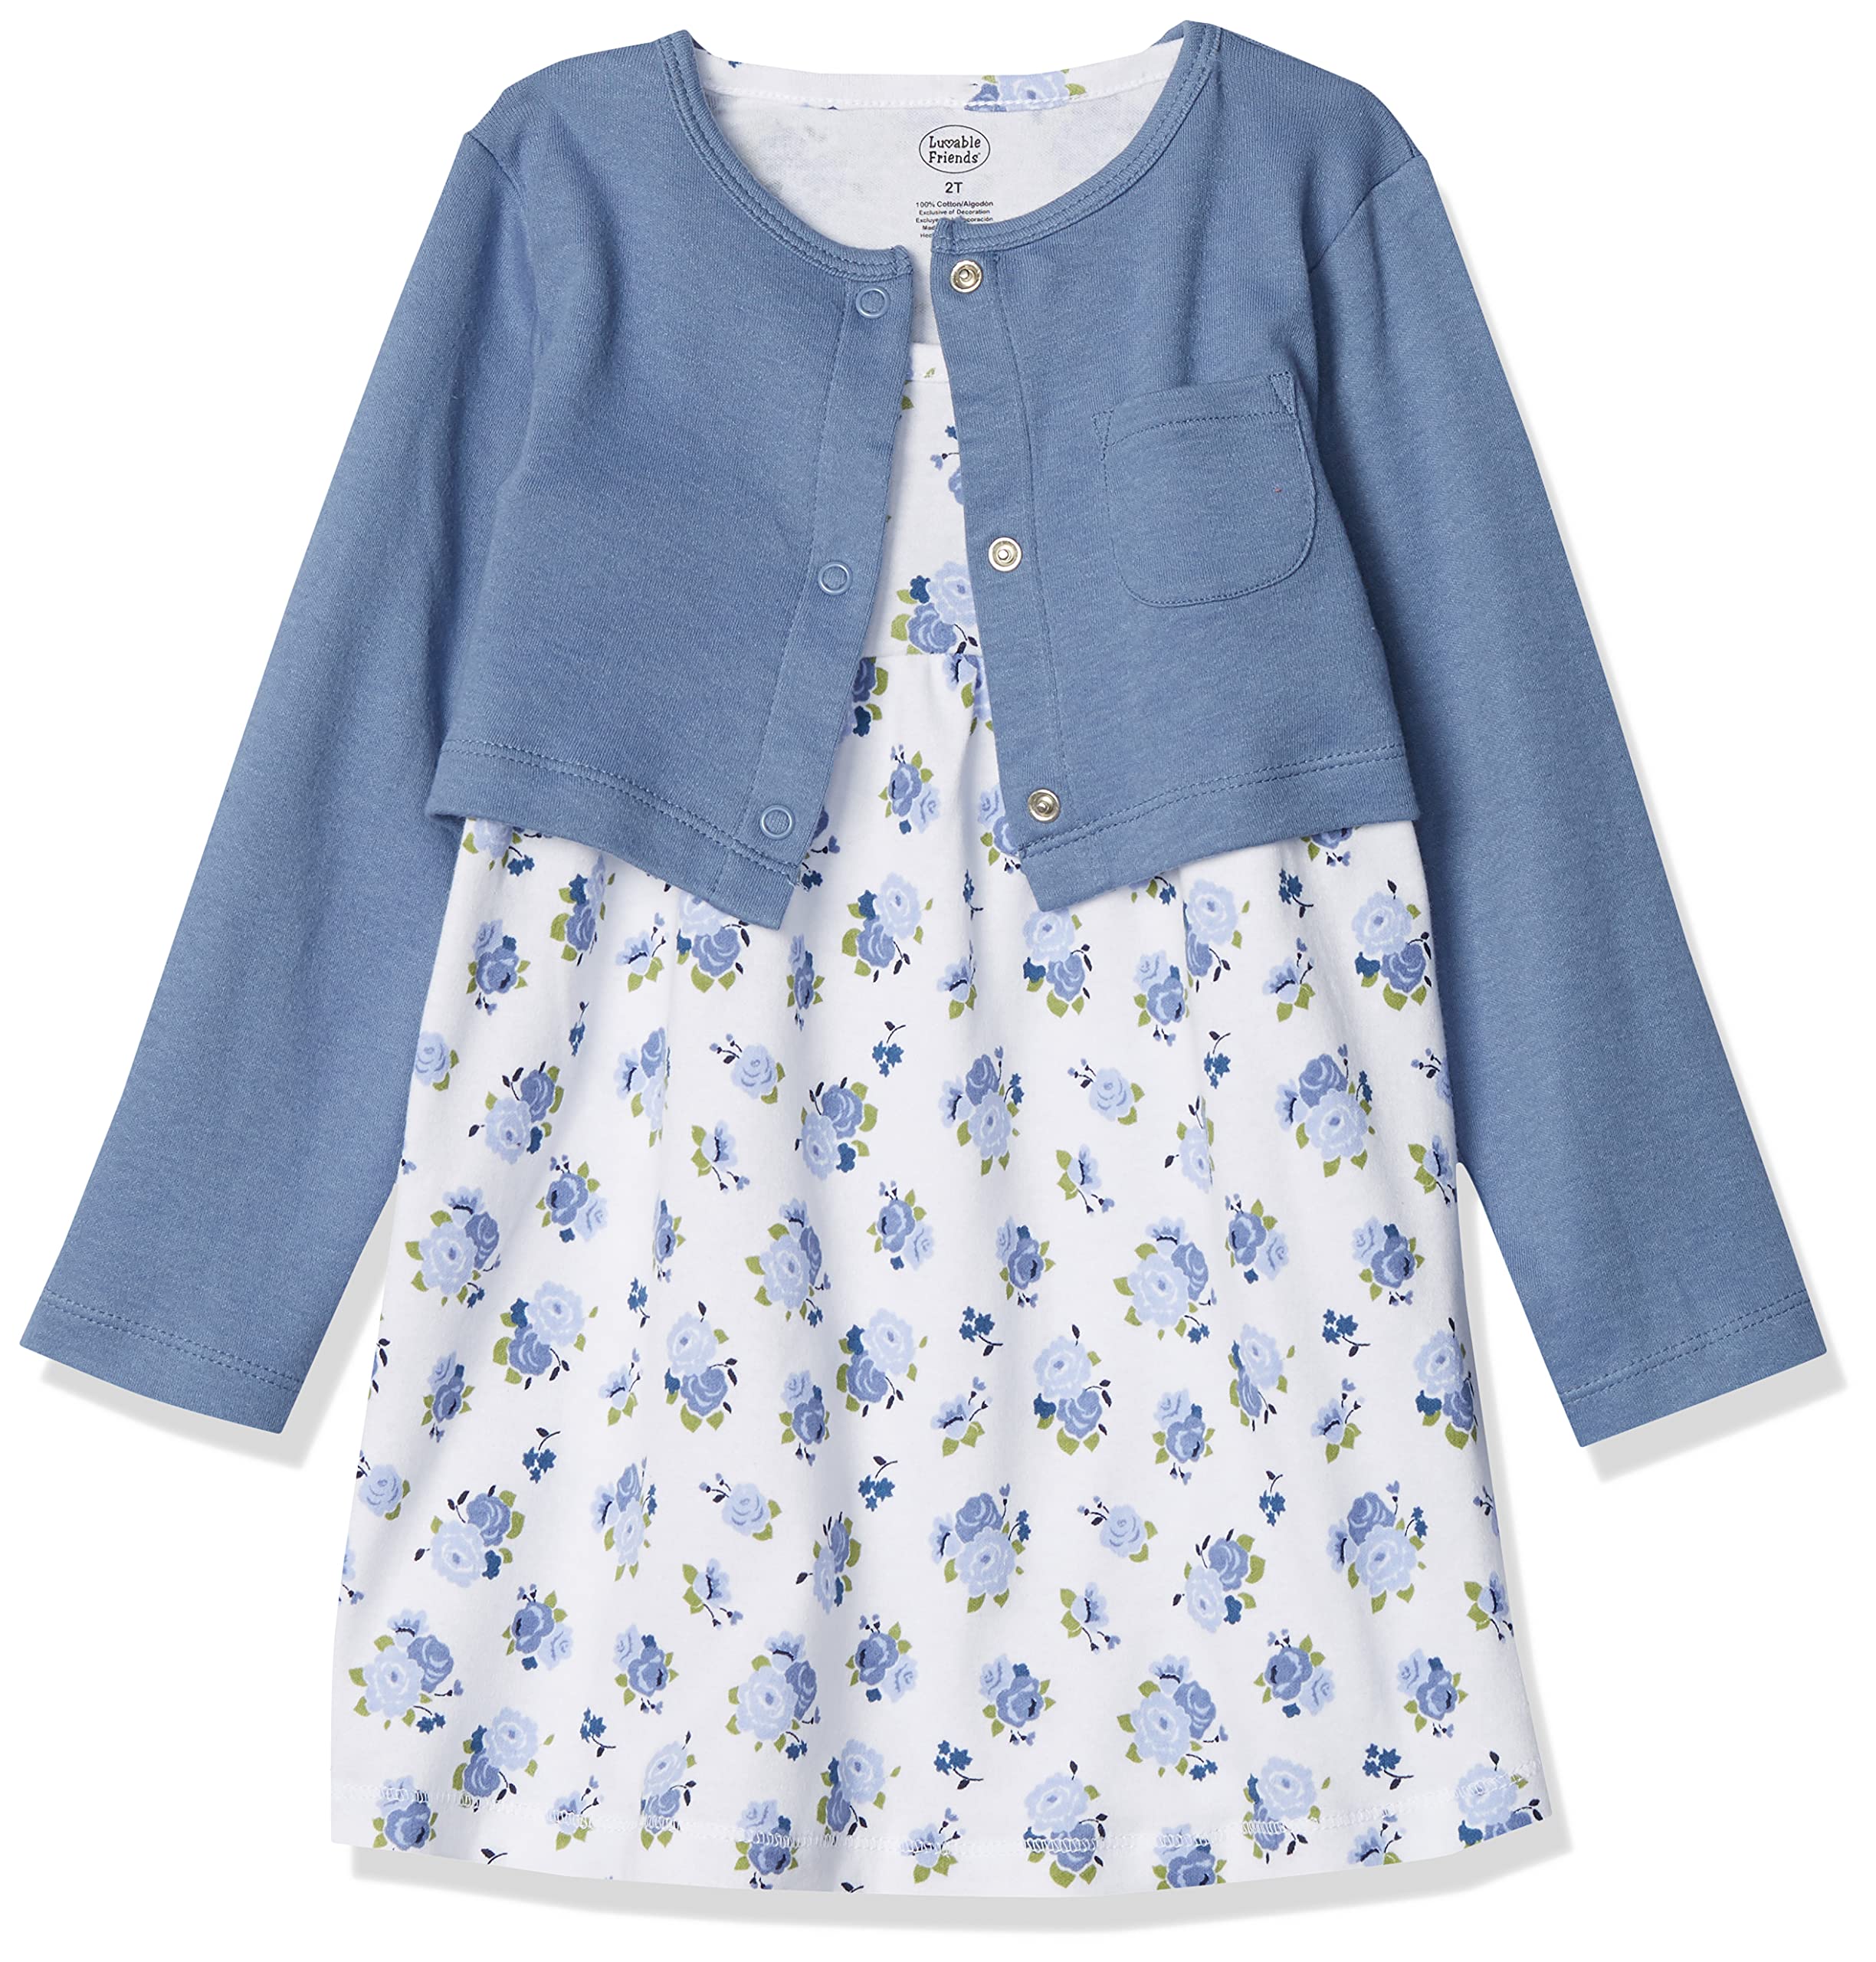 Luvable Friends girls Dress and Cardigan